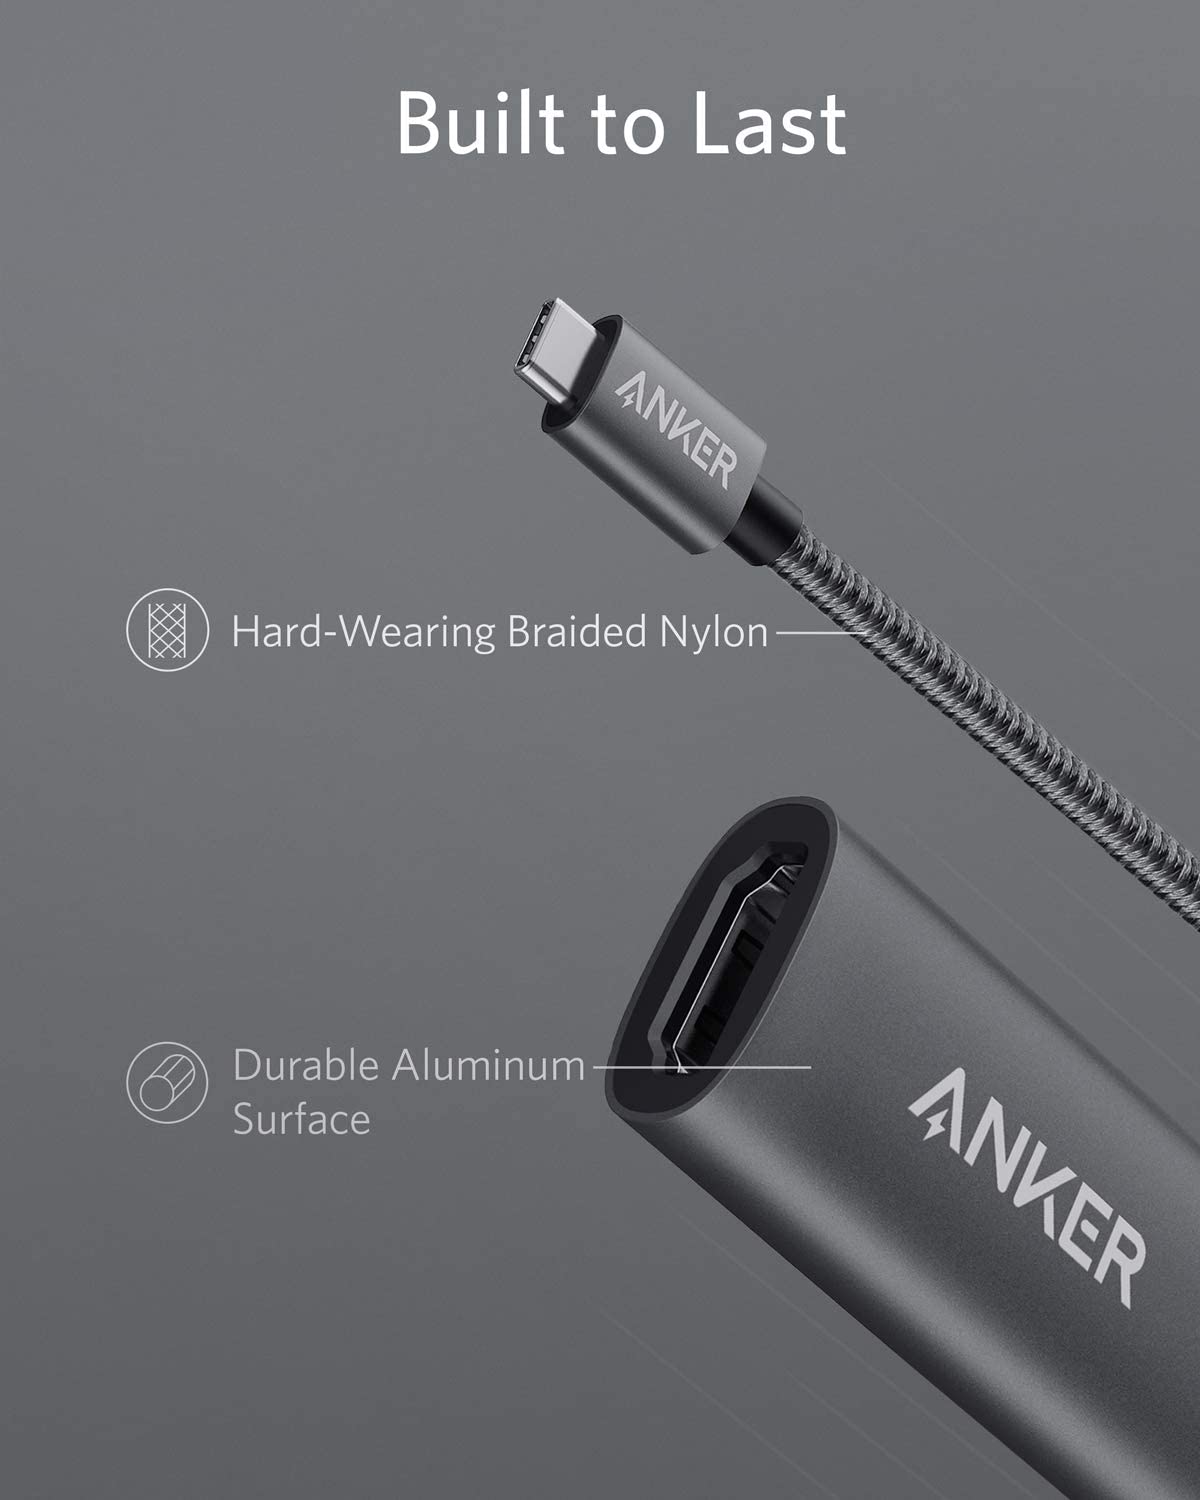 Anker Powerexpand + USB-C to Hdmi Adapter - A8312HA1